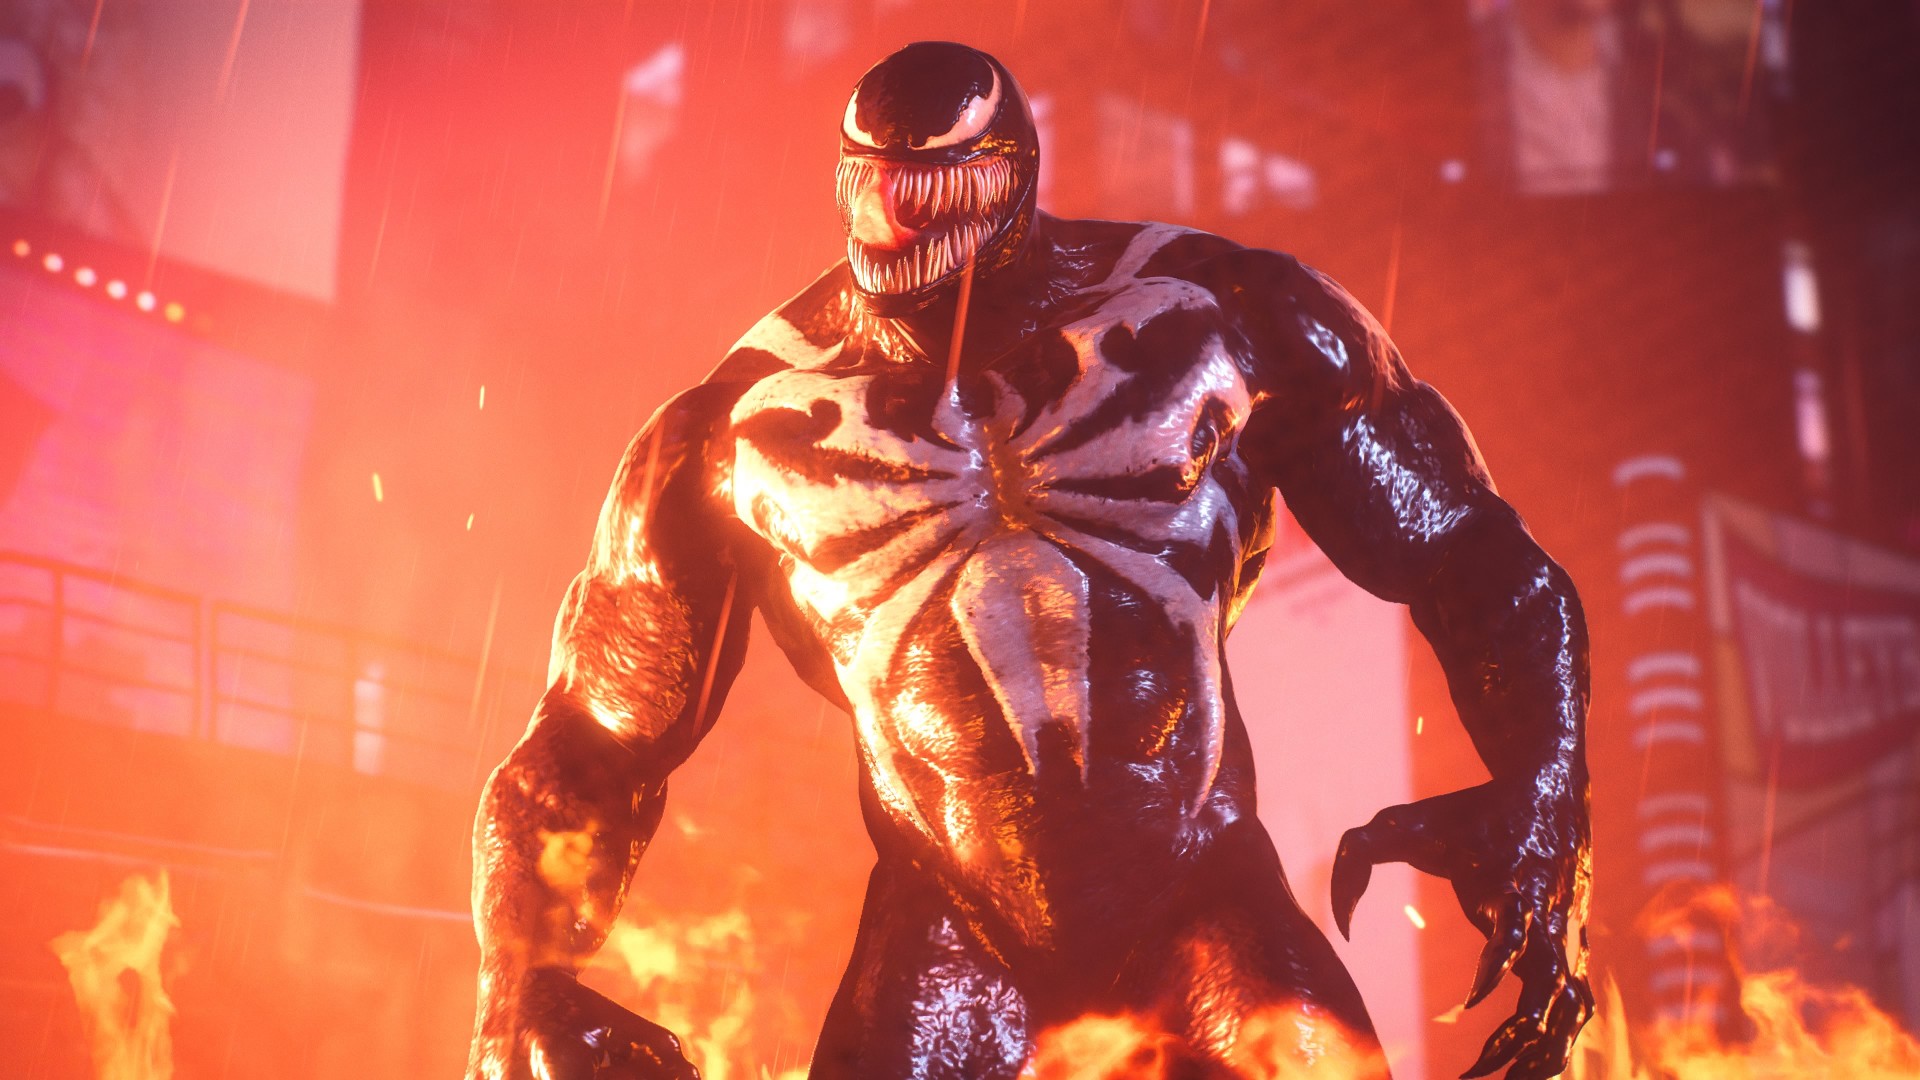 Does The Flame Set Up Spider-Man 2 DLC? All About The Flame in Spider-Man 2?  - News